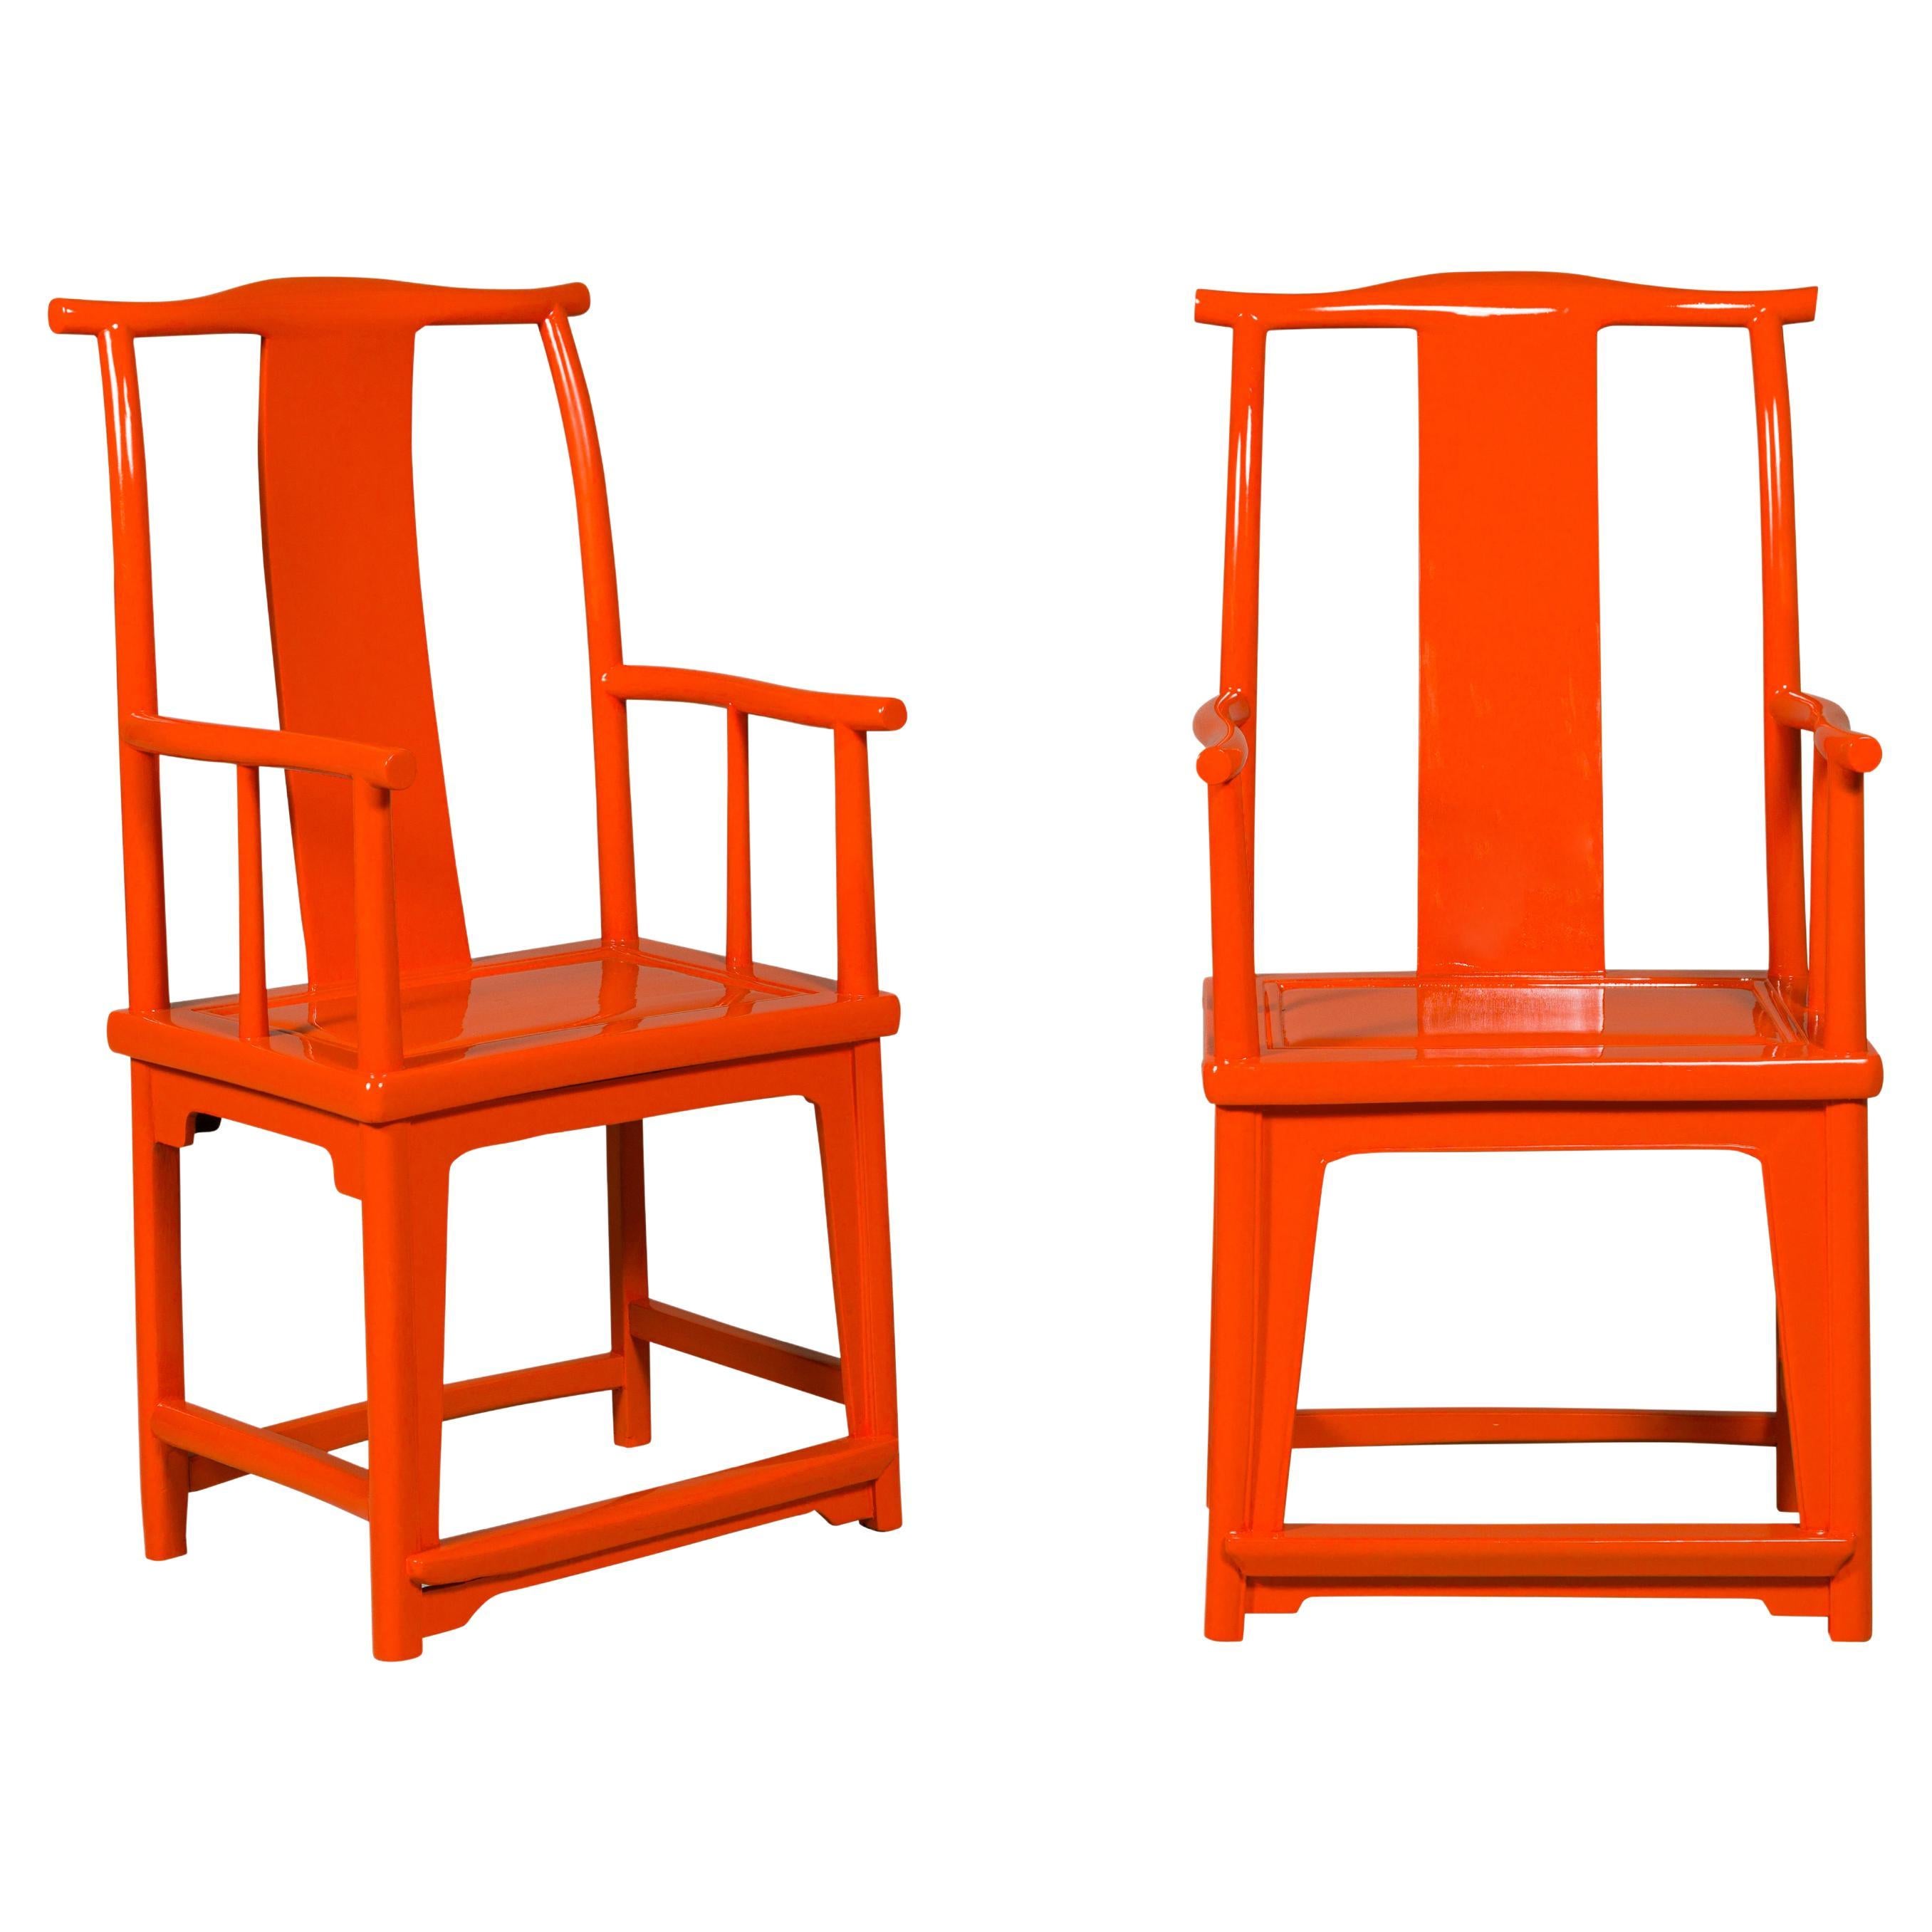 "The Lava Chair", Yoke Back Armchairs with Custom Deep Orange Lacquer, a Pair For Sale